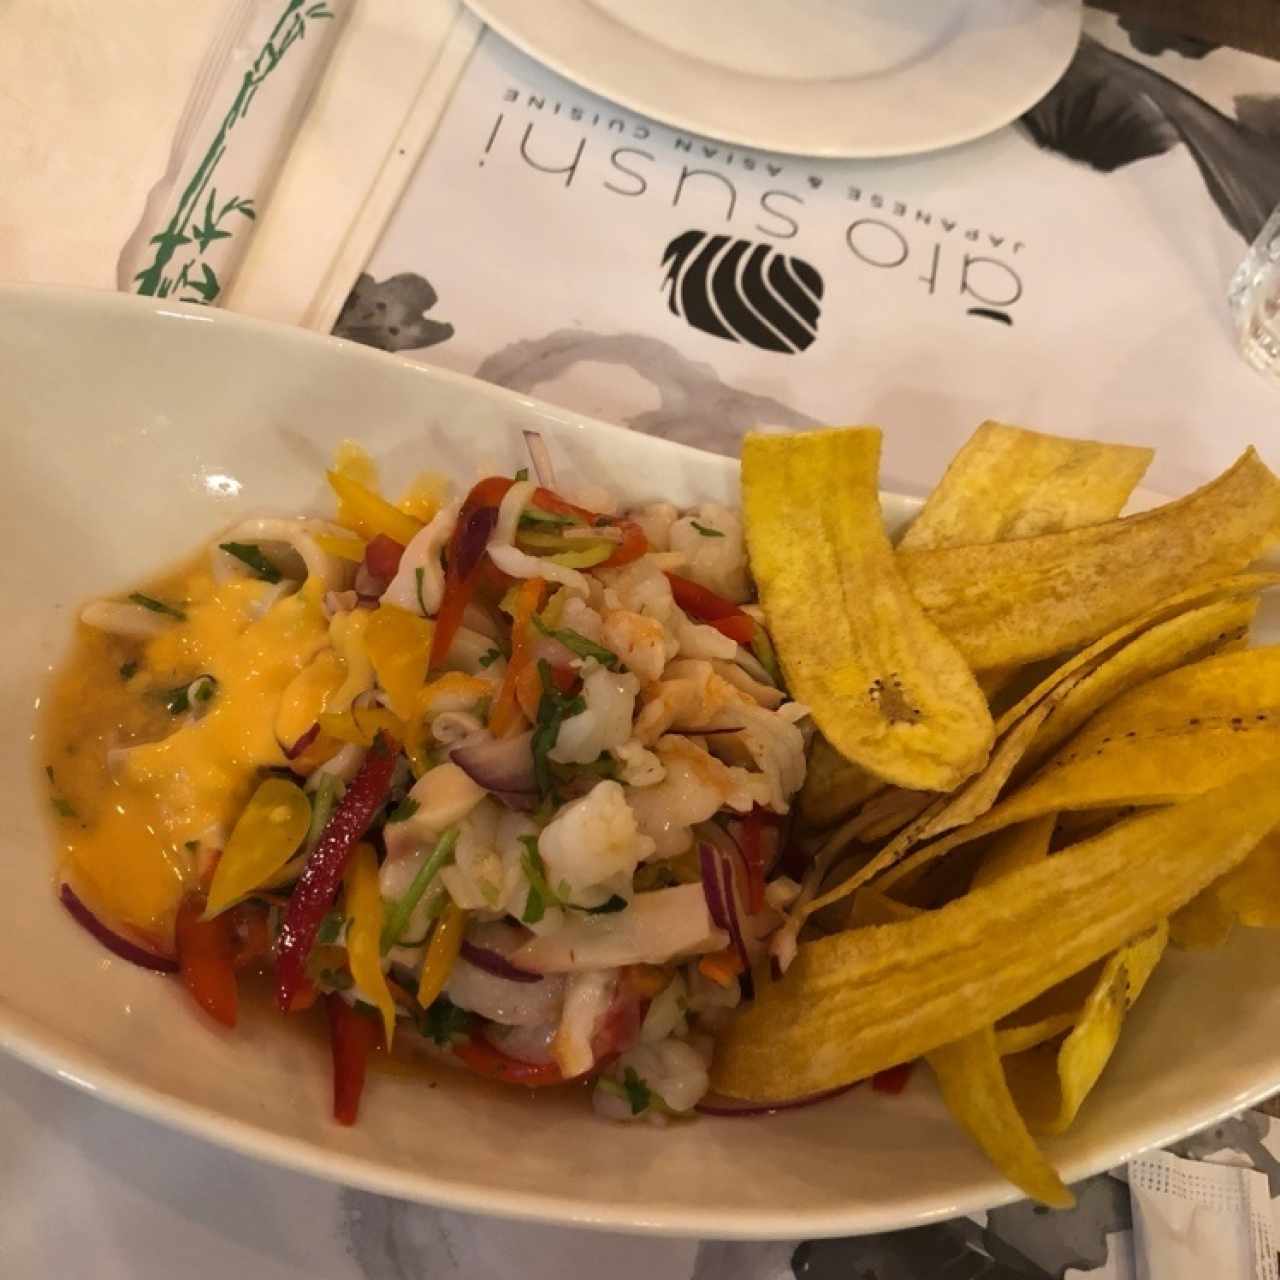 CEVICHES - Mariscos